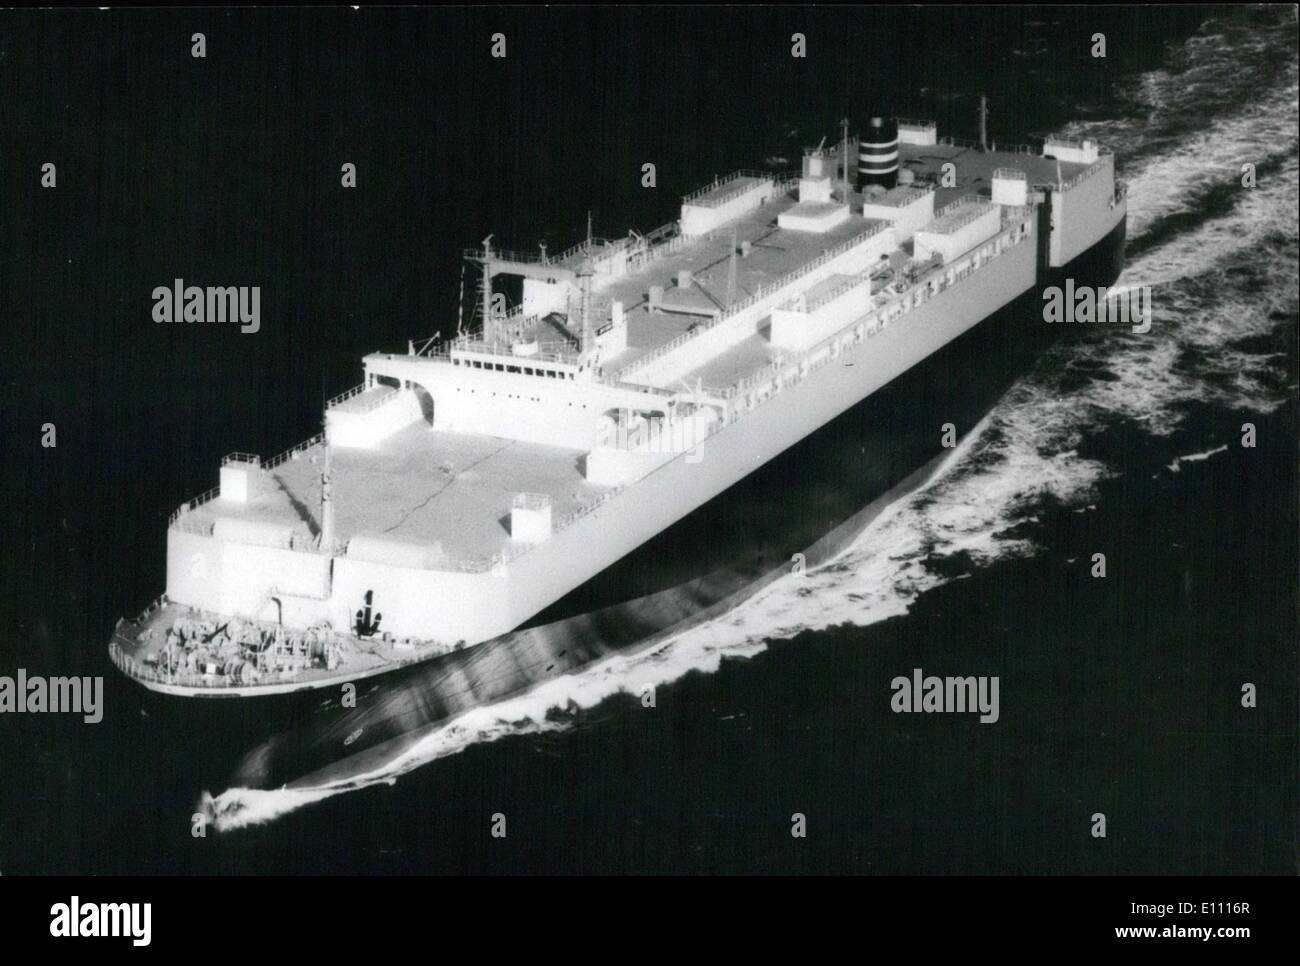 Dec. 12, 1974 - Japanese ship to carry 6,000 cars; The ''Jinyu-Maru'', the word's biggest automobile carrier, which can carry 6,000 cars, undergoes her sea trials off the coast of Japan. The ship 224.985 meters long, 32.20 m wide, and weighing 16,343 tons, with a speed of 24.83 knots was built by Mitsubishi Heavy Industries at their Kobe shipyard, for the Nihon Yusen Shipping Co. Stock Photo